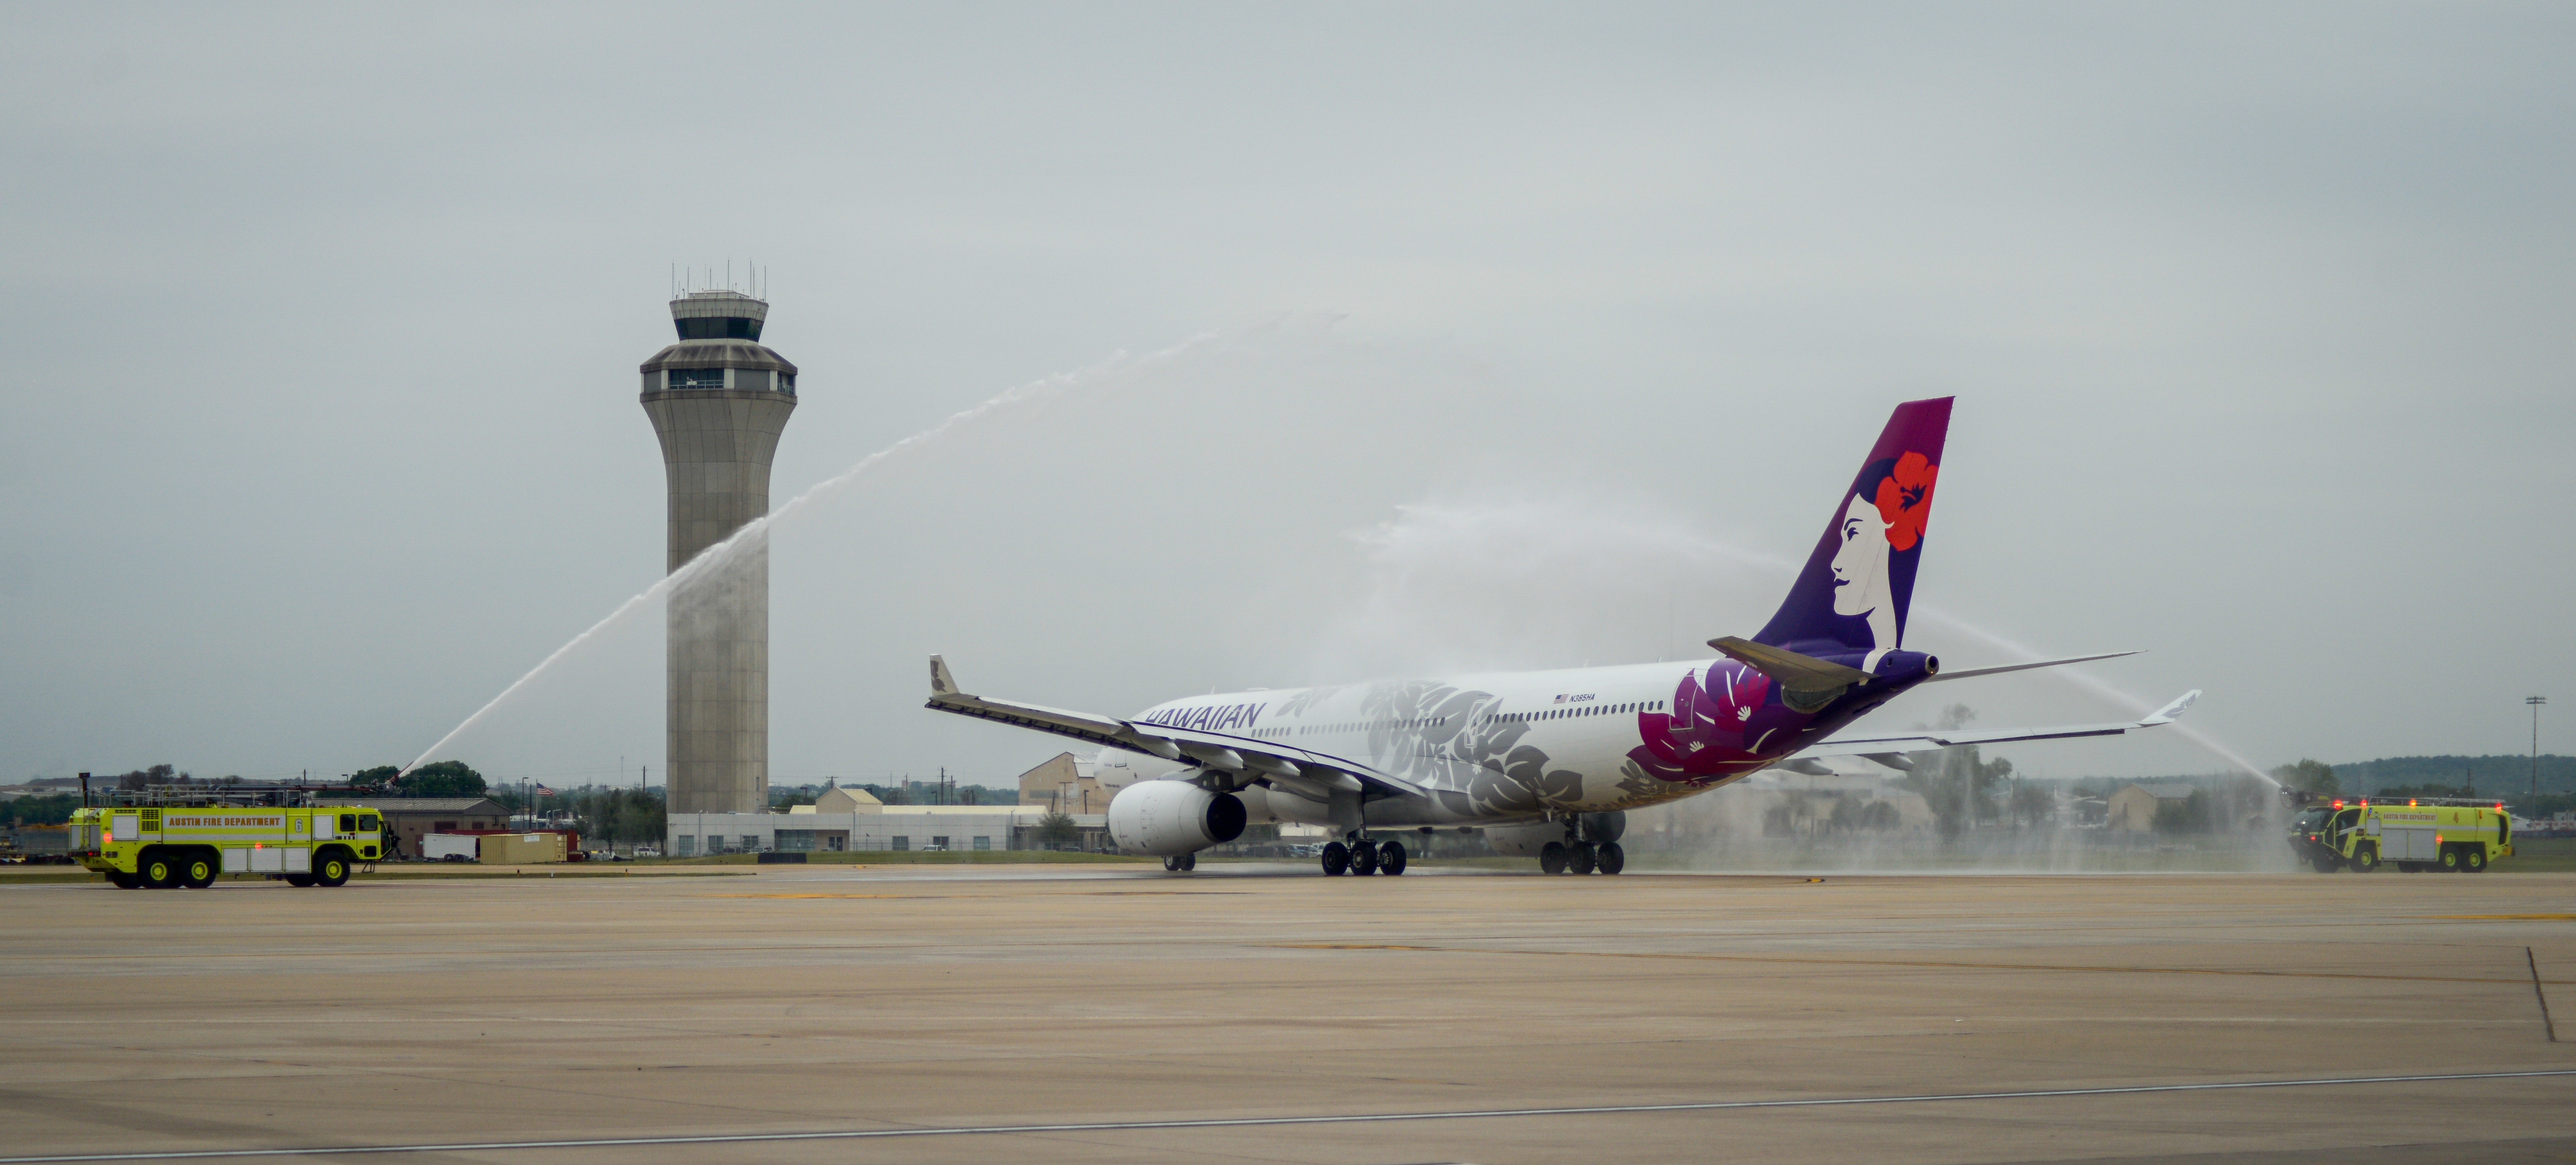 photo of a Hawaiian Airlines Airbus A330 taxiing to the runway as it receives a water canon salute.